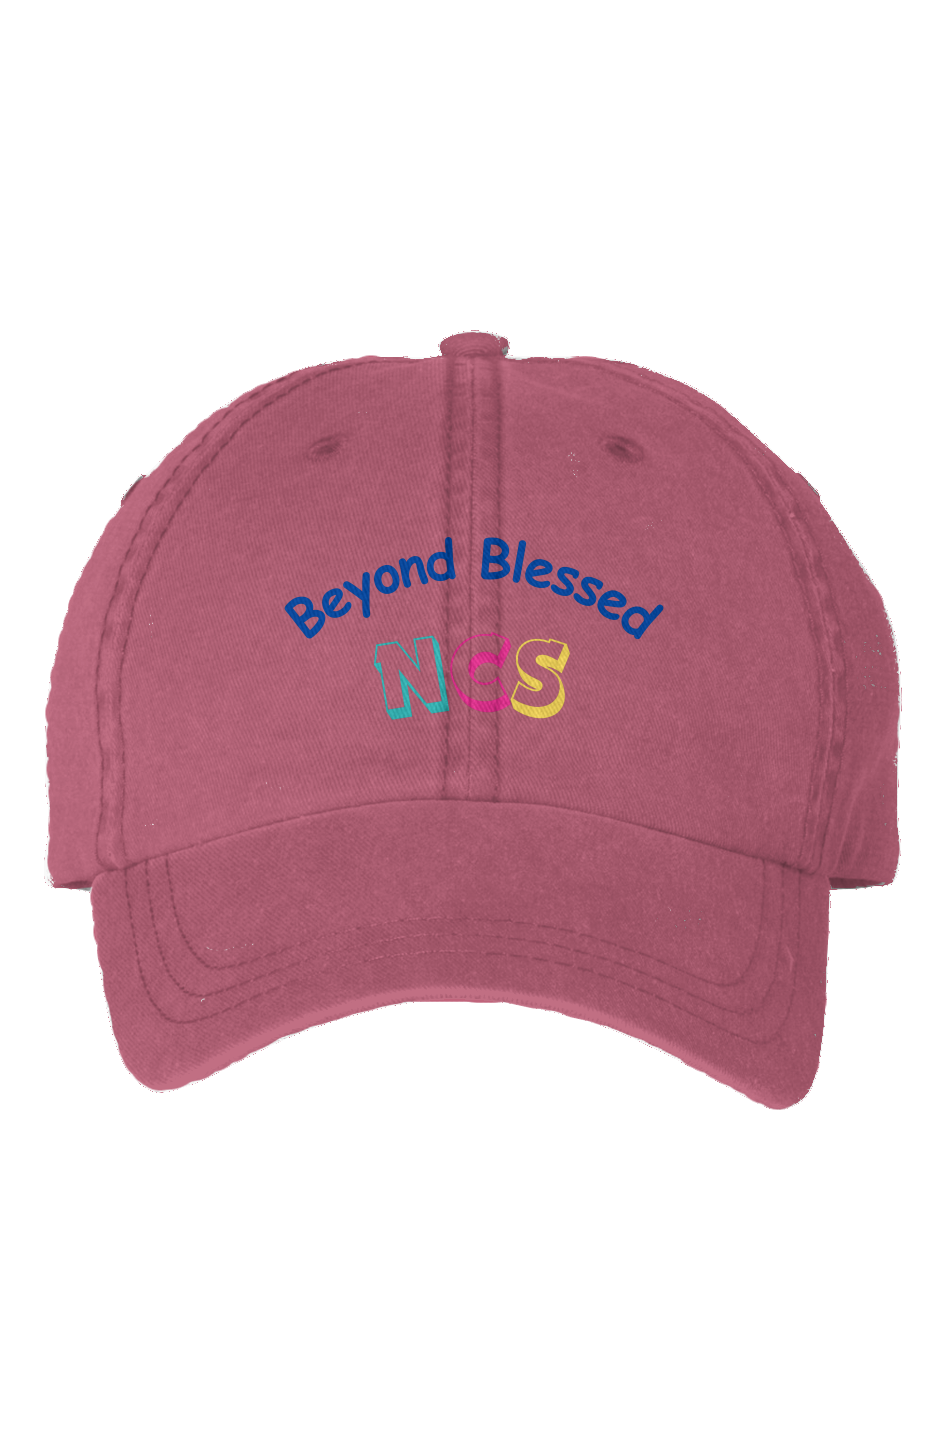 Beyond Blessed NCS - Dyed Cap